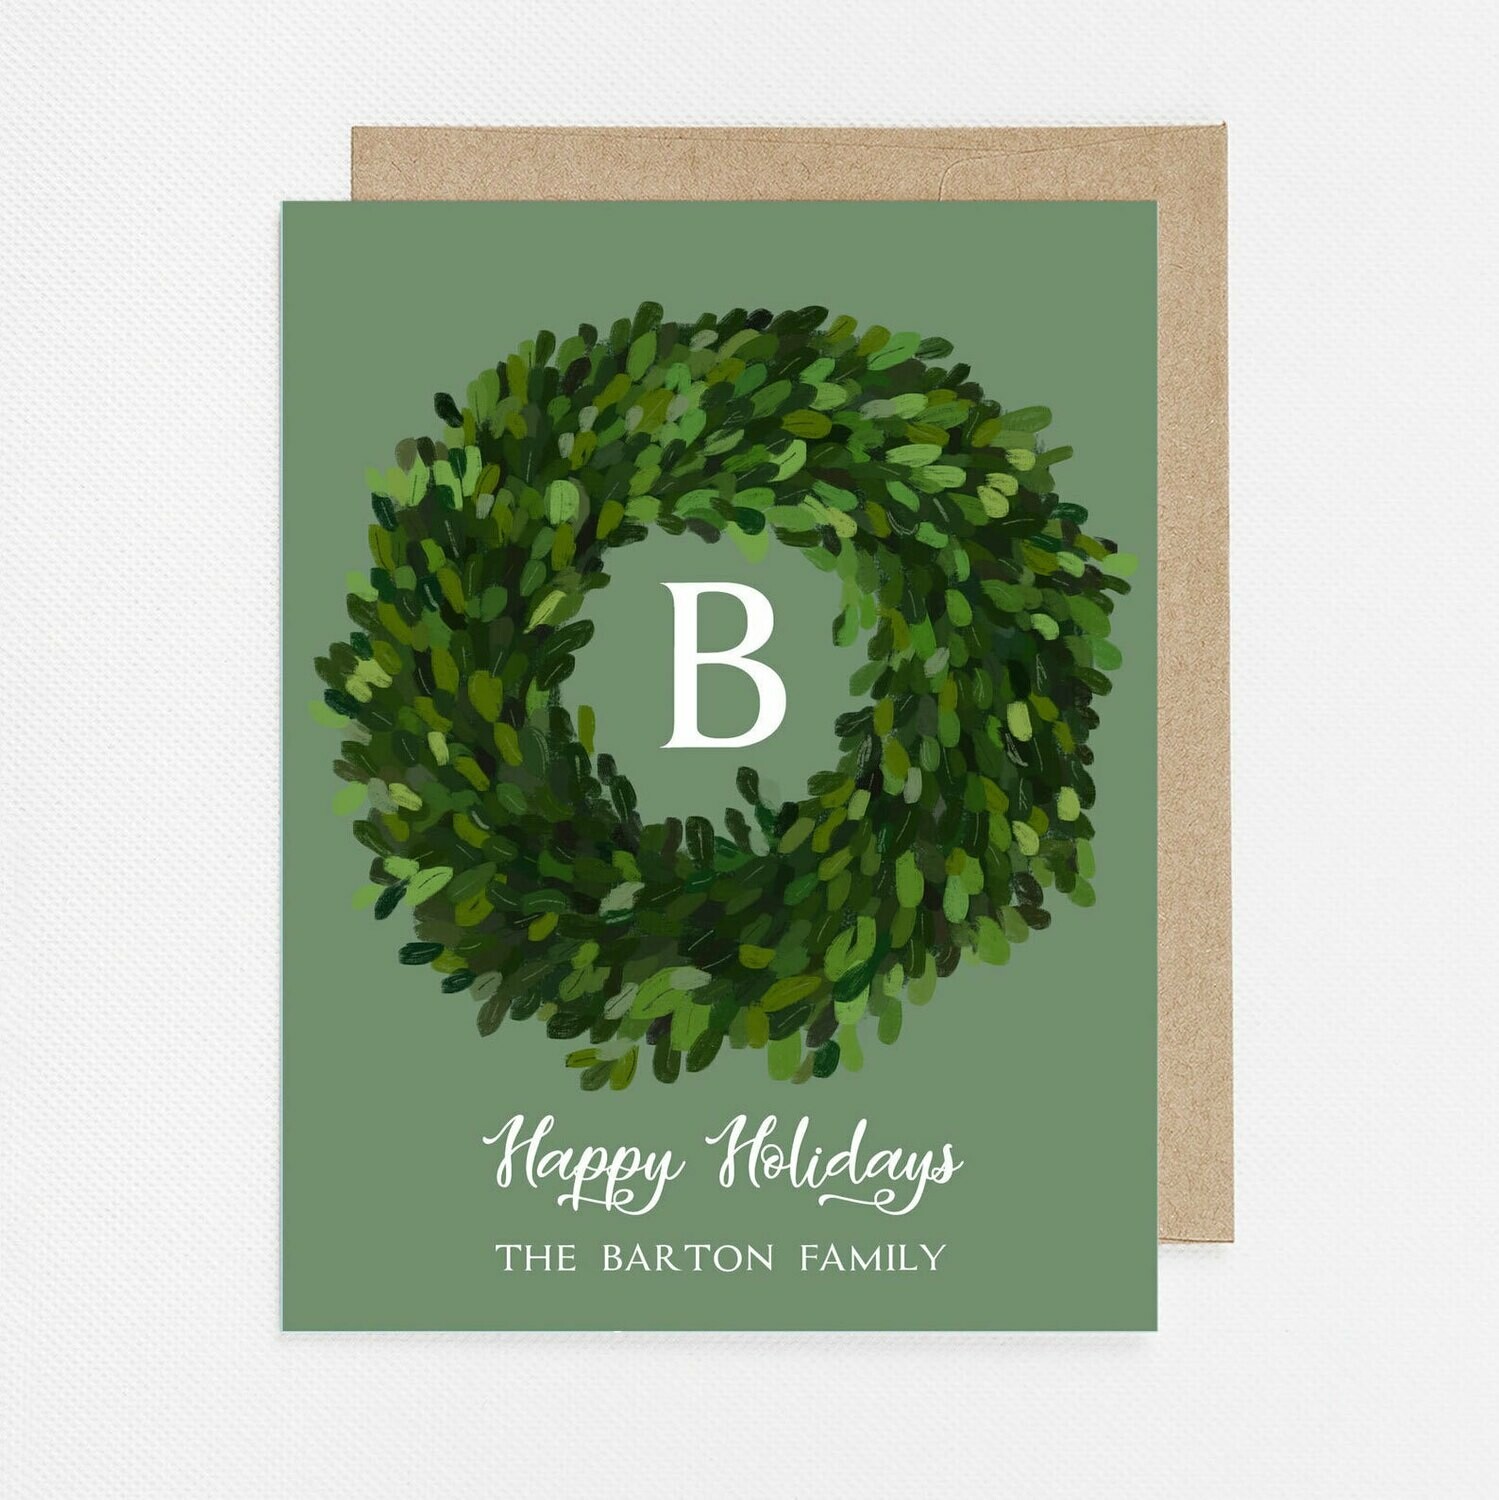 Green Wreath Watercolor Christmas Card with inside text